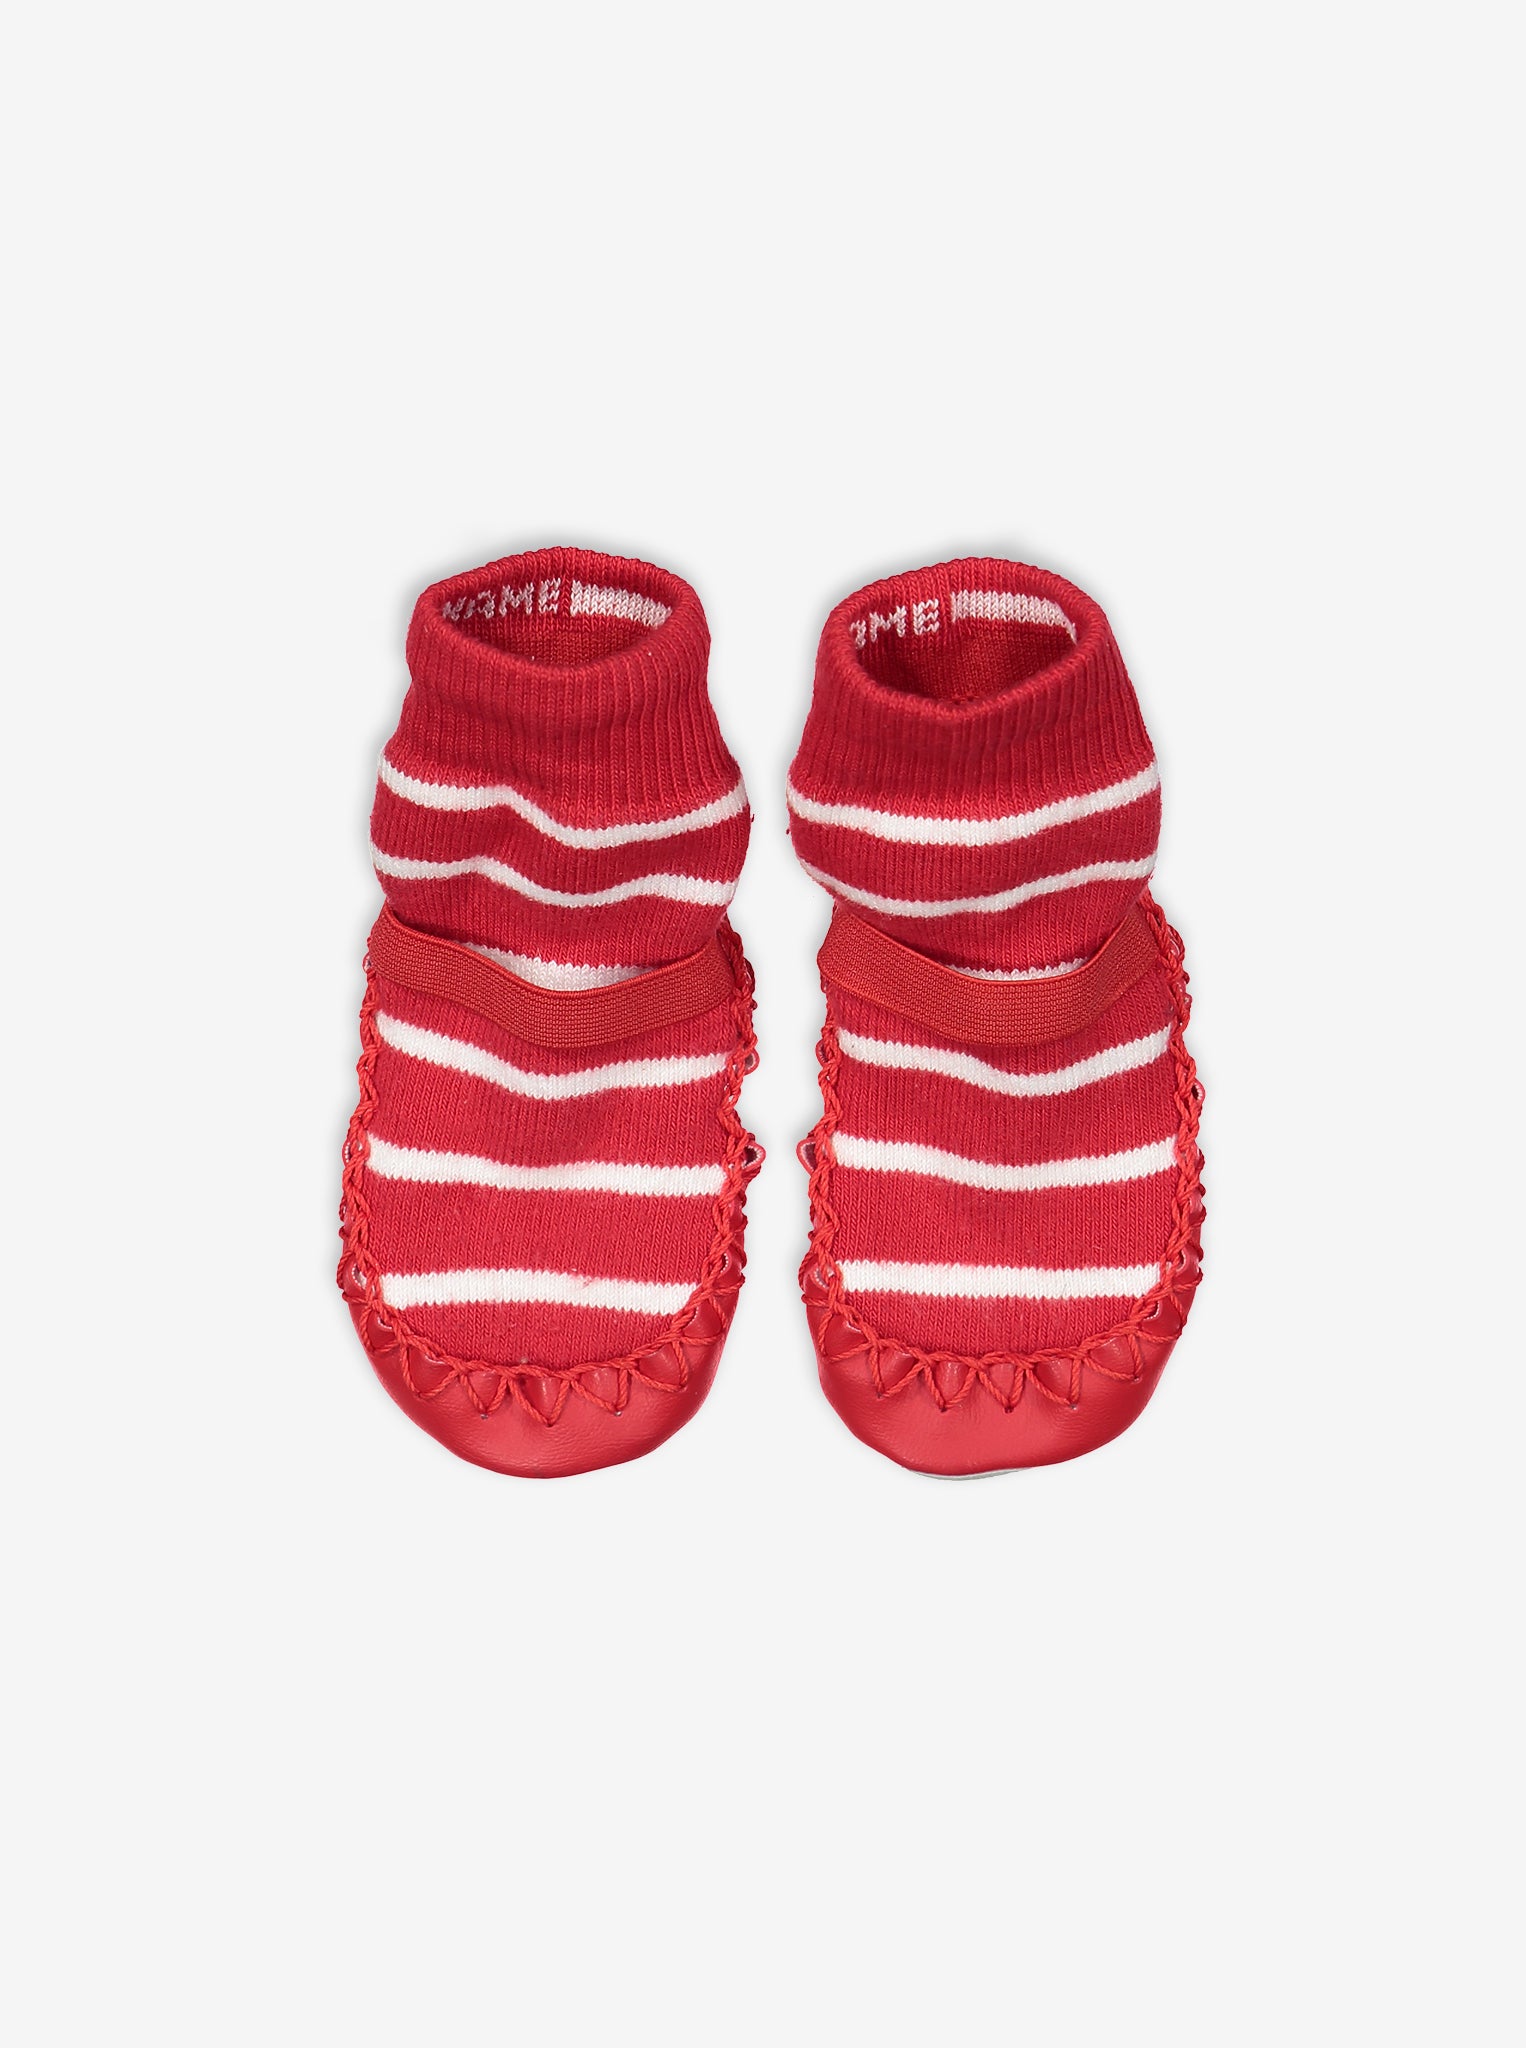 PO.P classic red and white striped  Moccasins